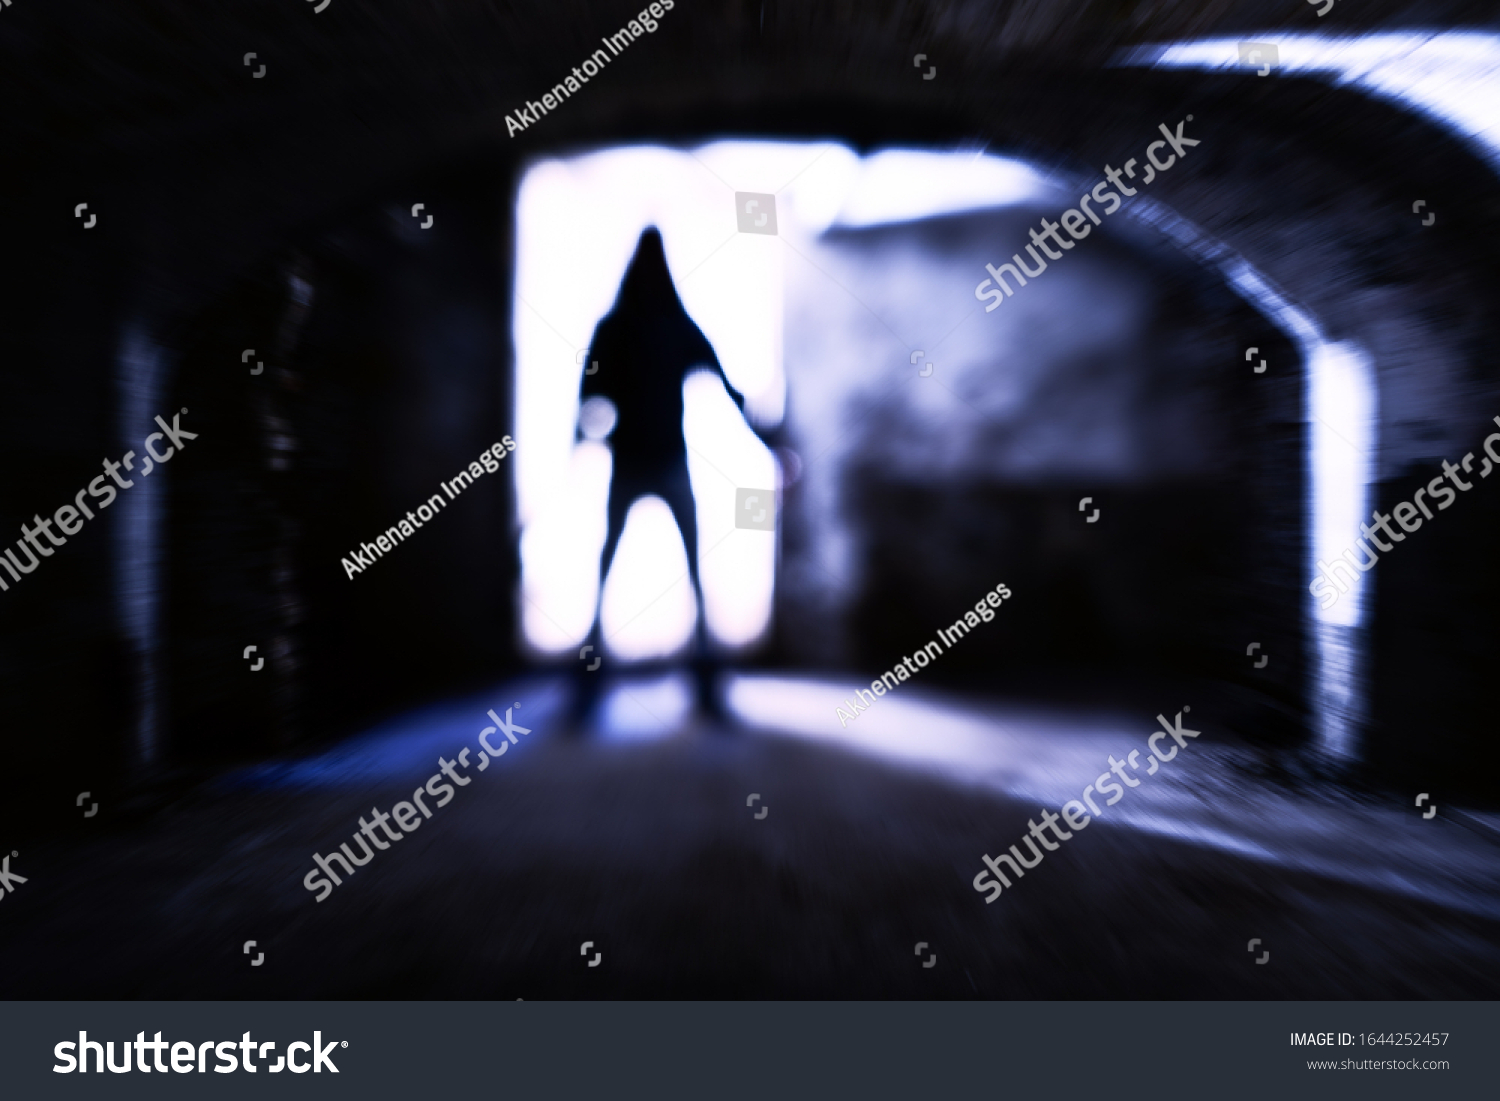 Silhouette of evil theatening body in dark basement - Sinister figure standing at dungeon door with dangerous attitude - Concept of a dreadful encounter with blurred subject in backlight - Image #1644252457